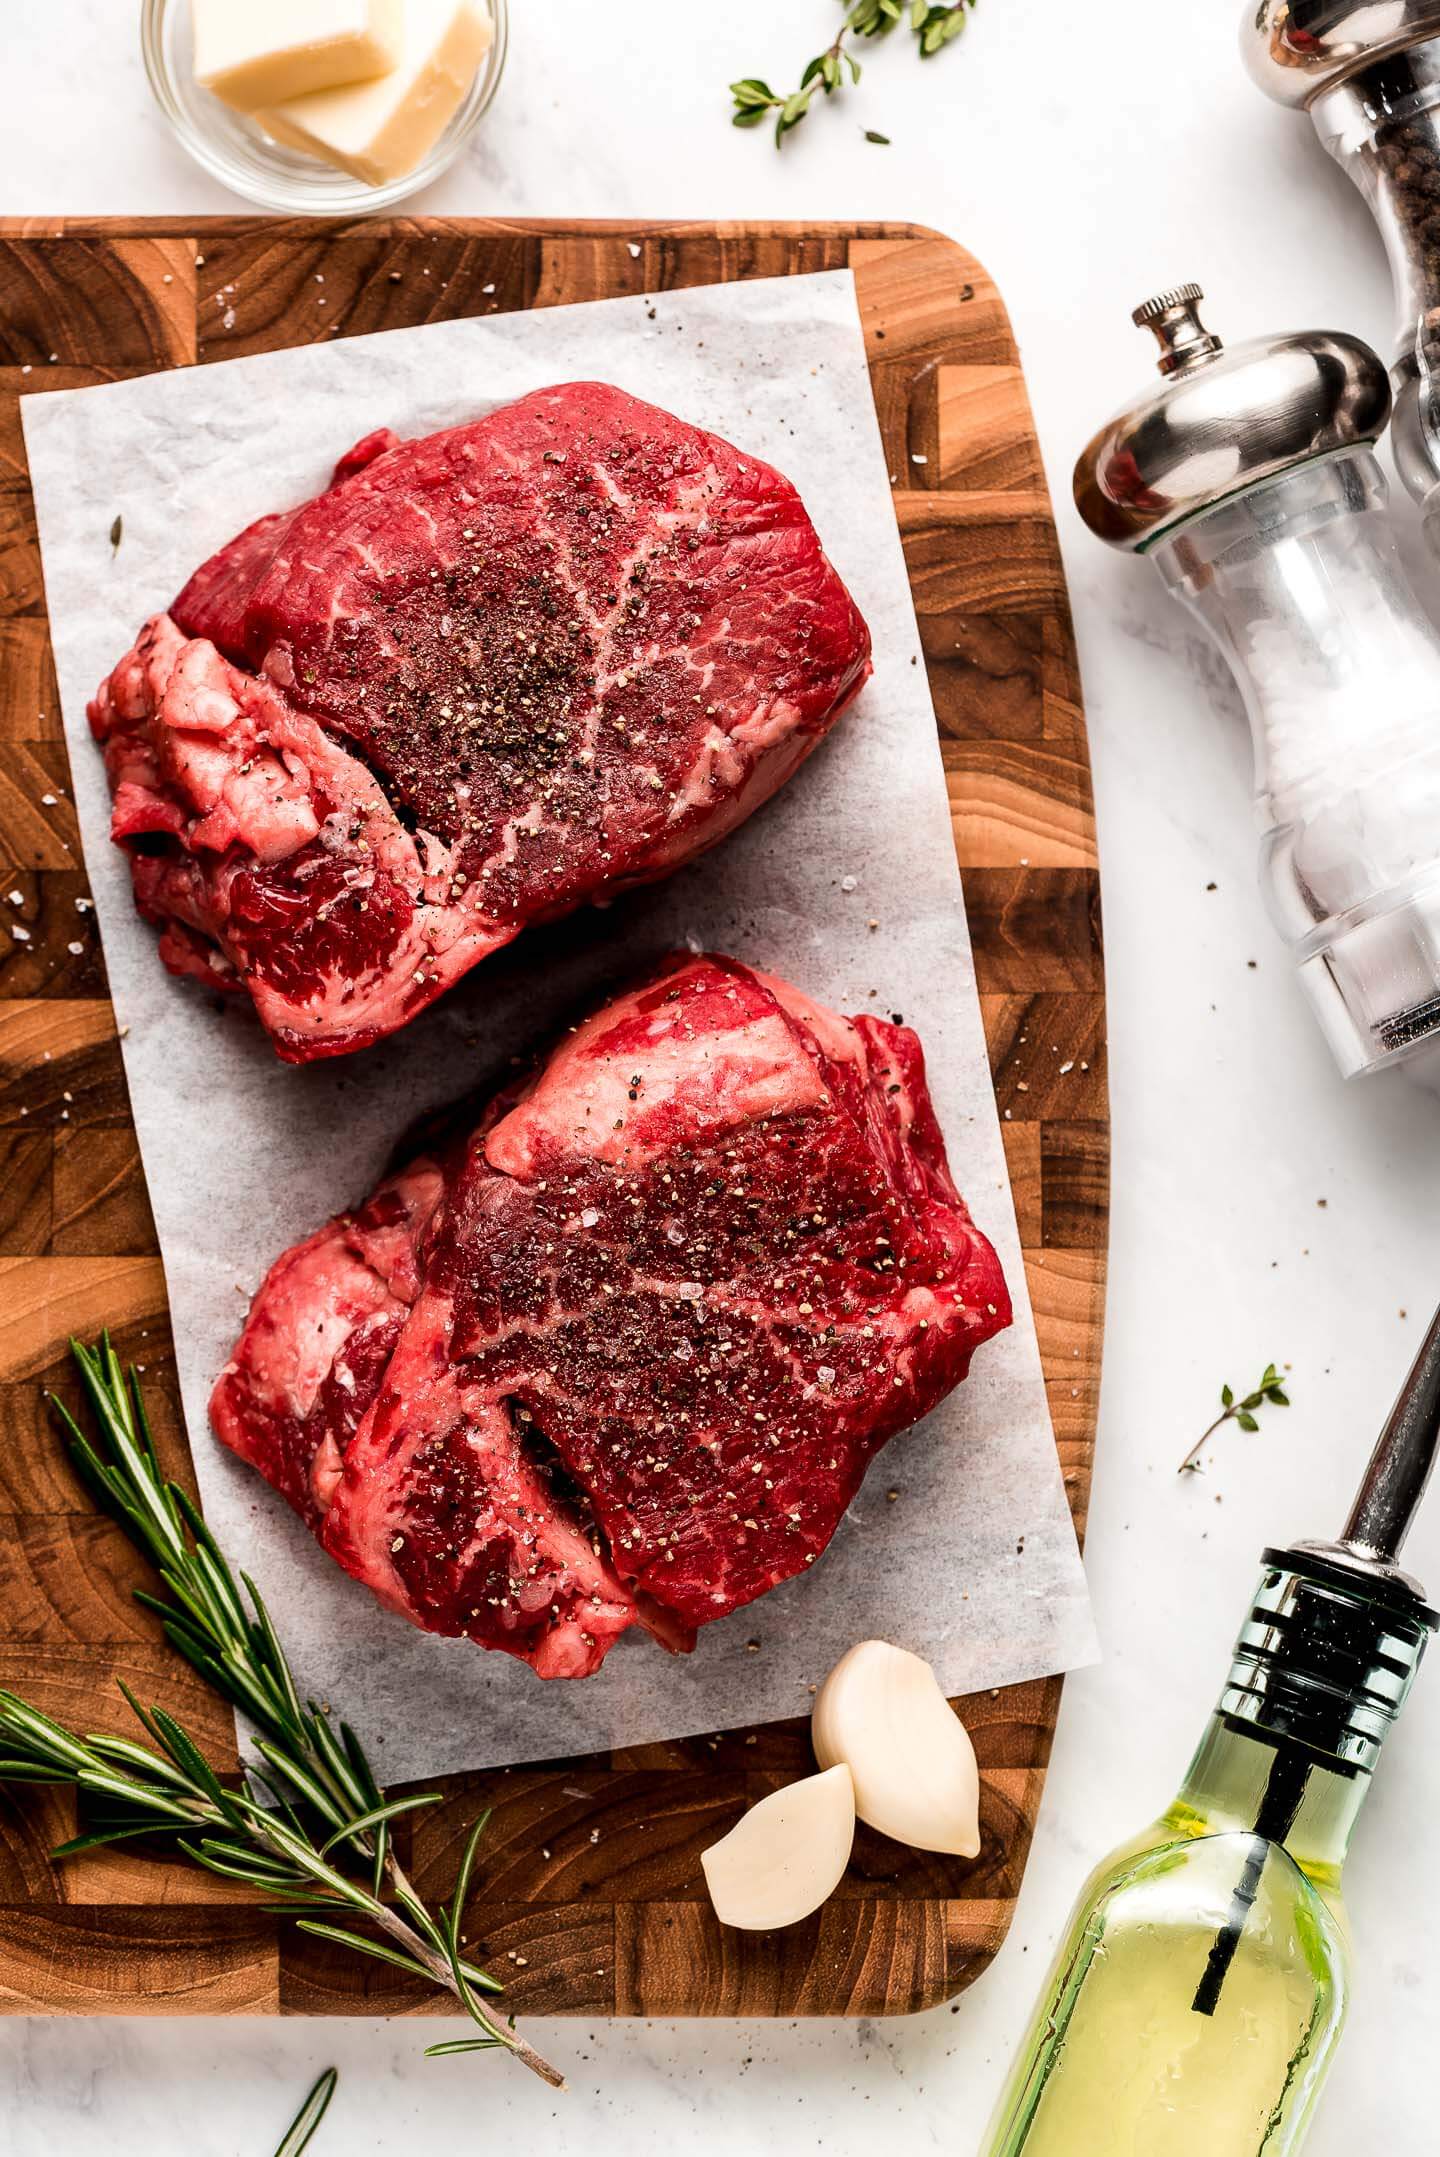 Two raw cuts of filet mignon on a wooden cutting board with fresh herbs, salt and pepper, olive oil, and butter on the table.